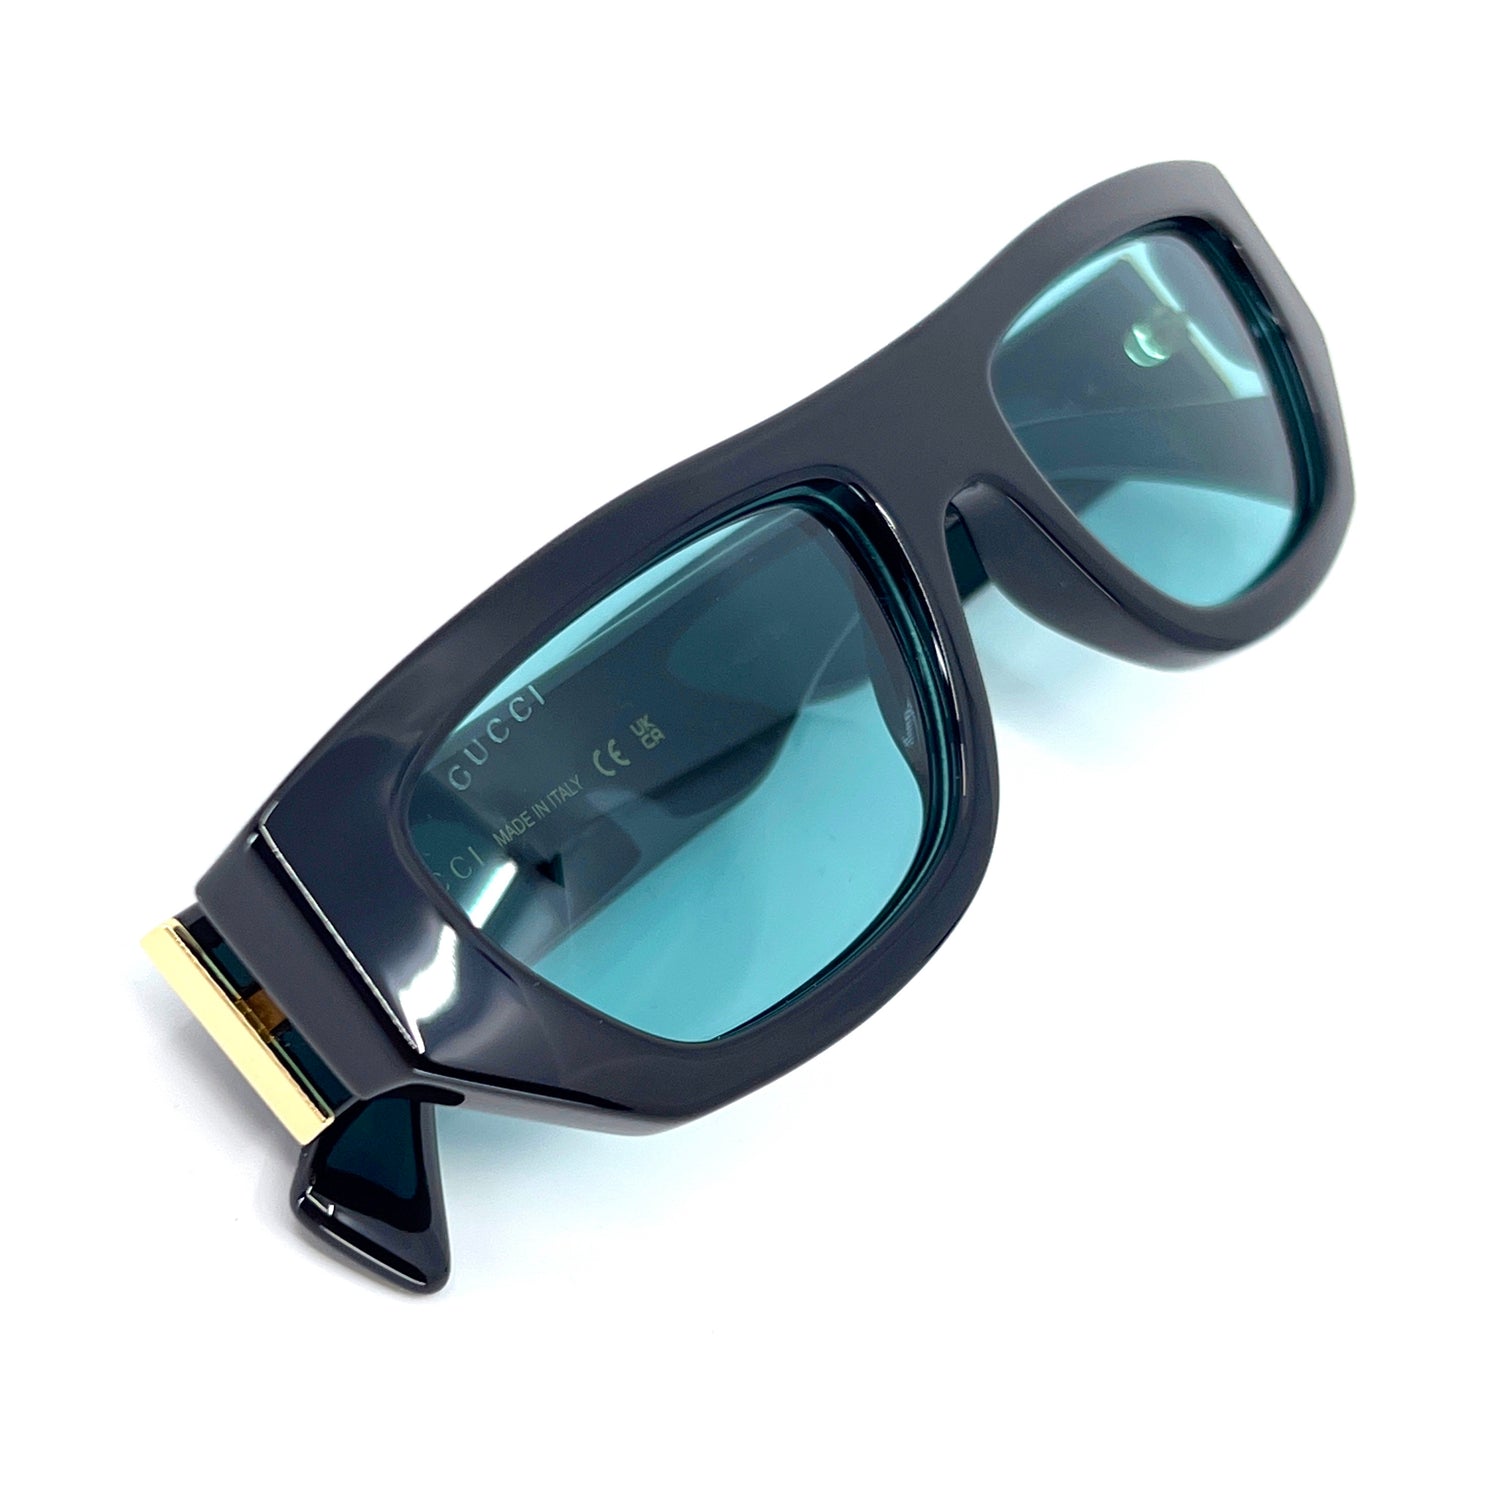 Louis Vuitton Men's Sunglasses for sale in Charleston, South